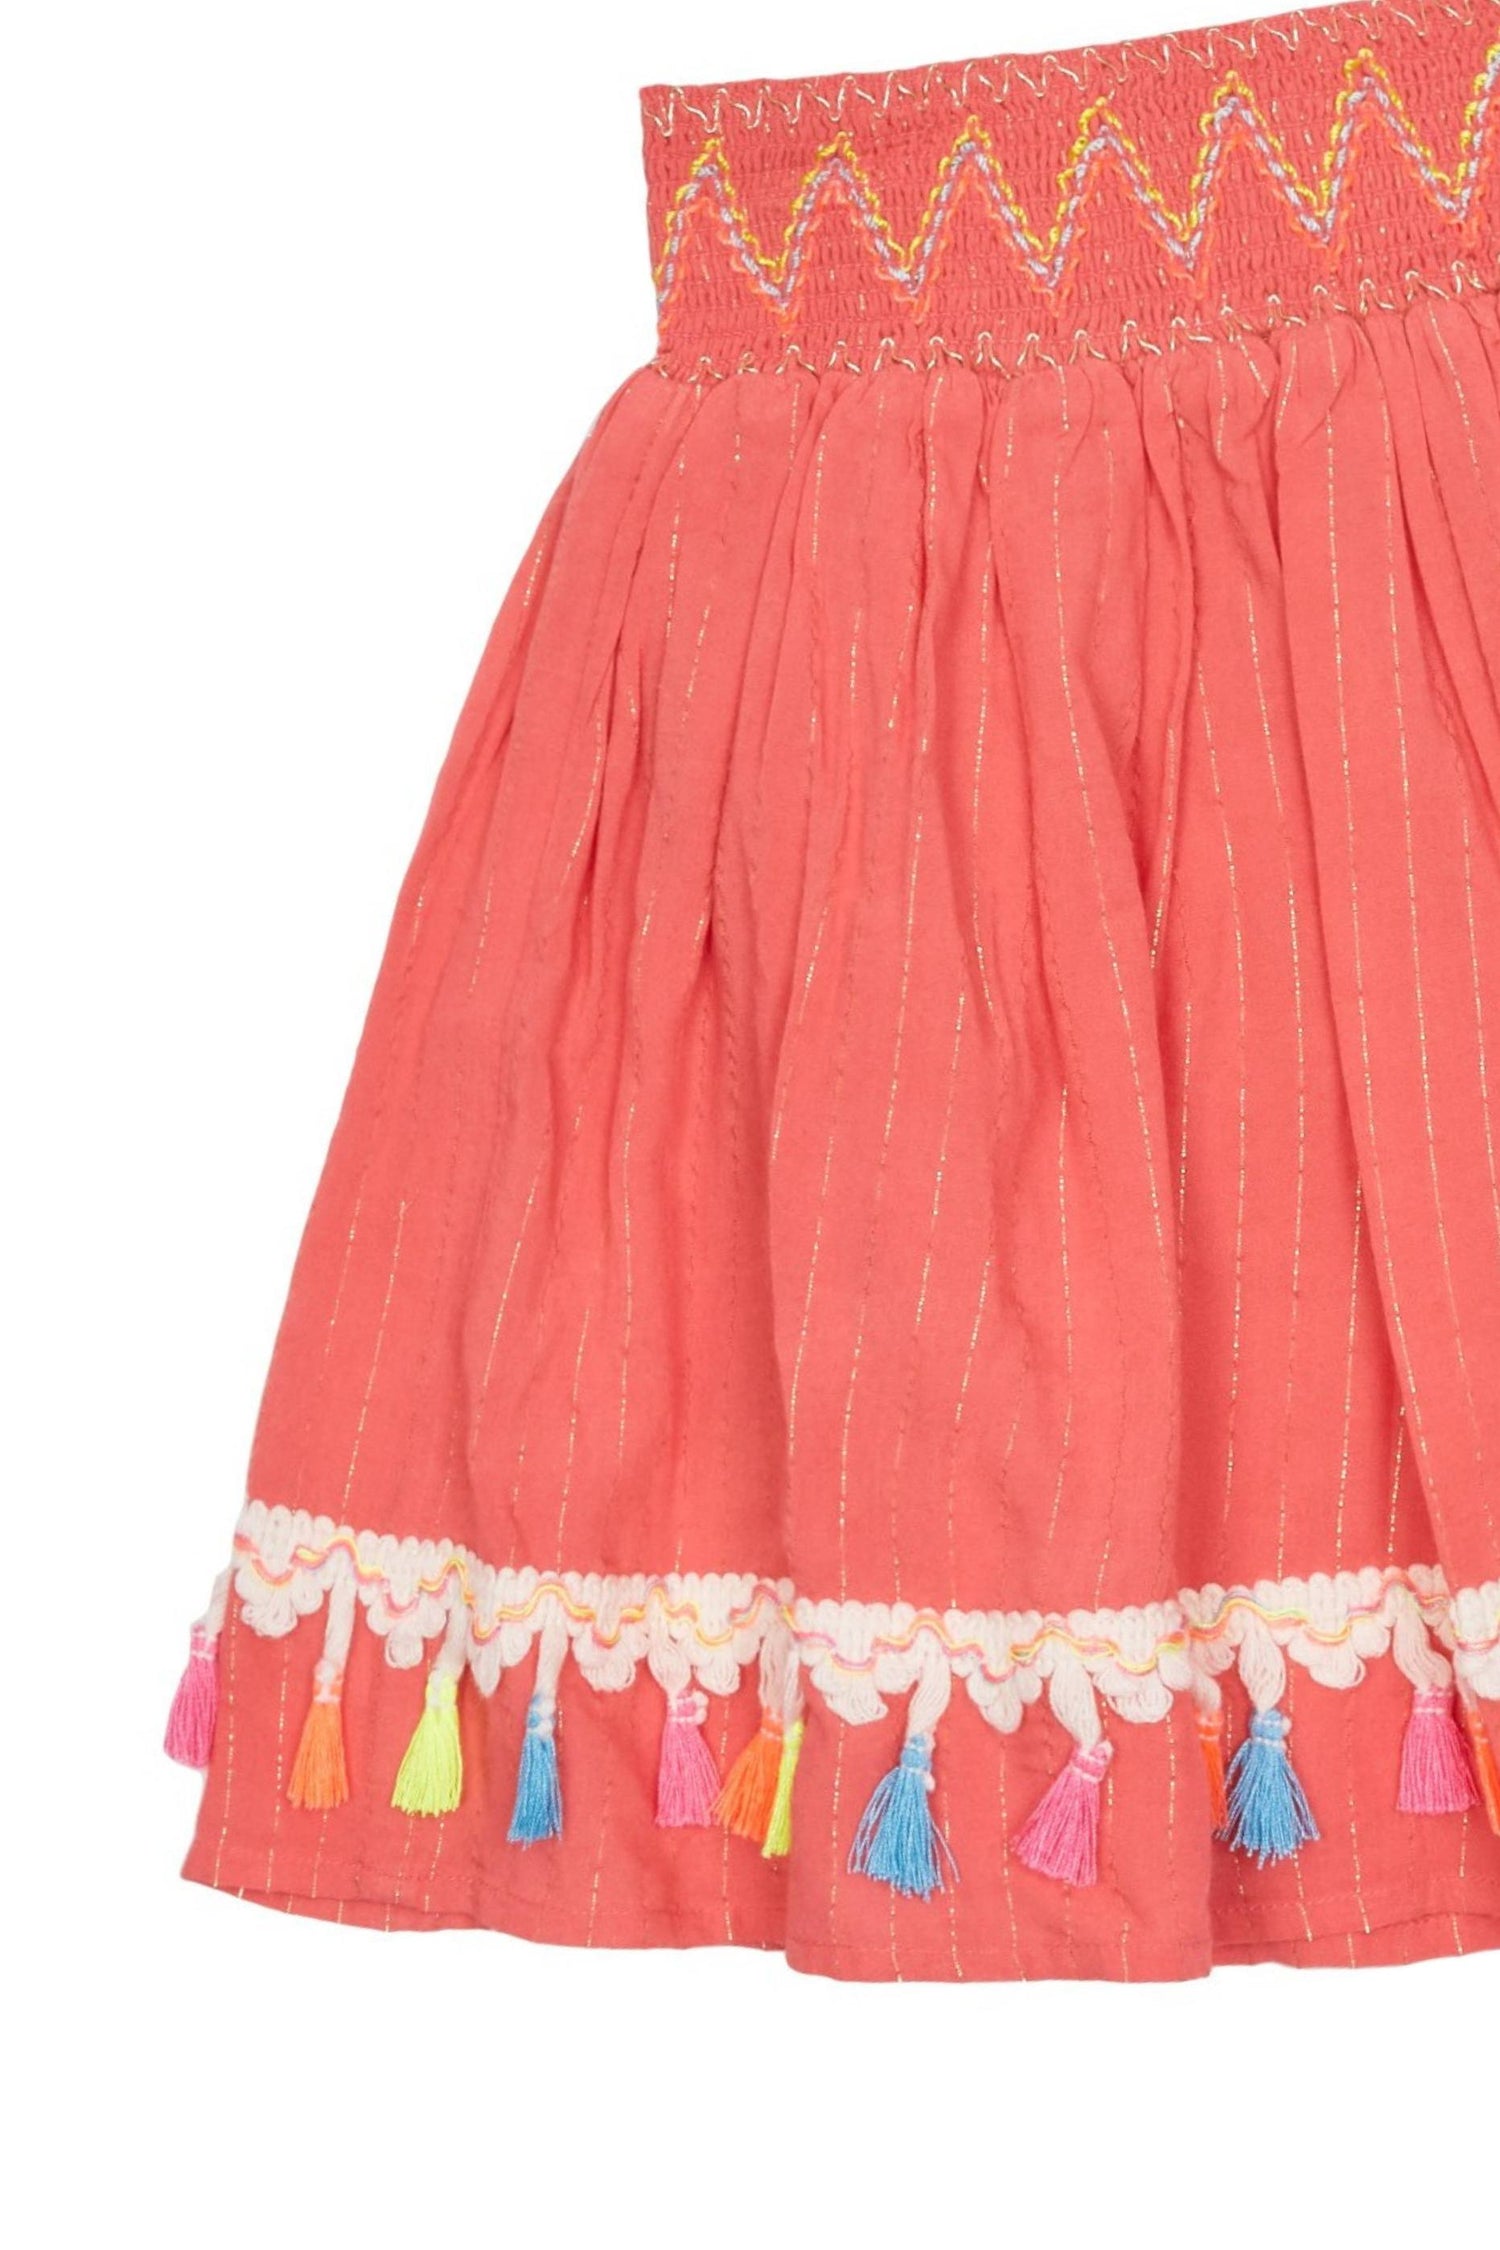 Close up of coral-colored skirt with metallic thread stripes, zig-zag stitching on waist, and embroidered fringe at hem. 